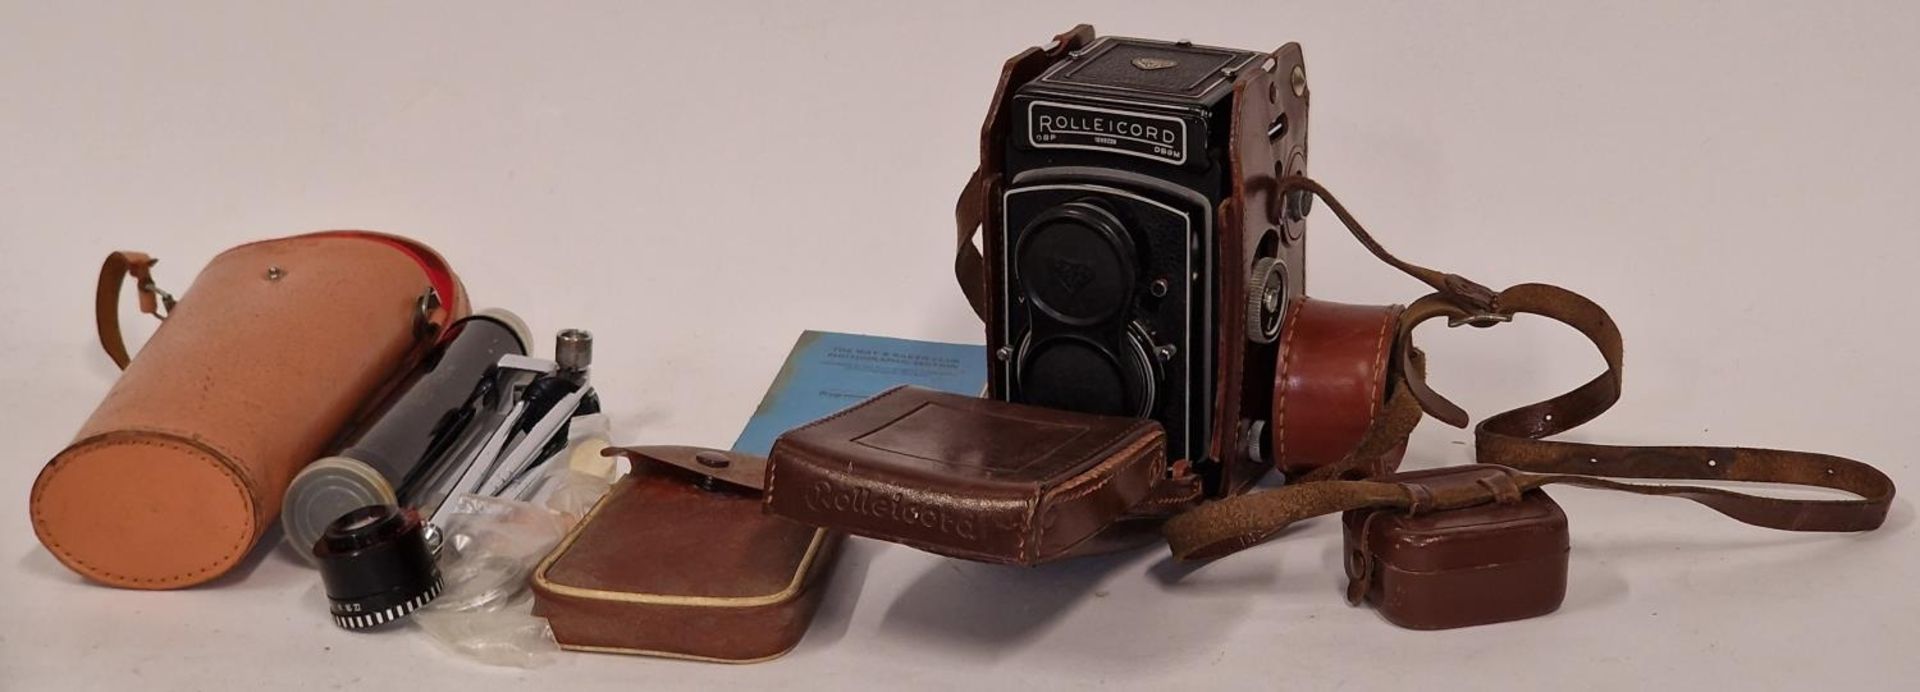 Rolleicord Twin Lens Reflex TLR camera in case together with some other accessories.